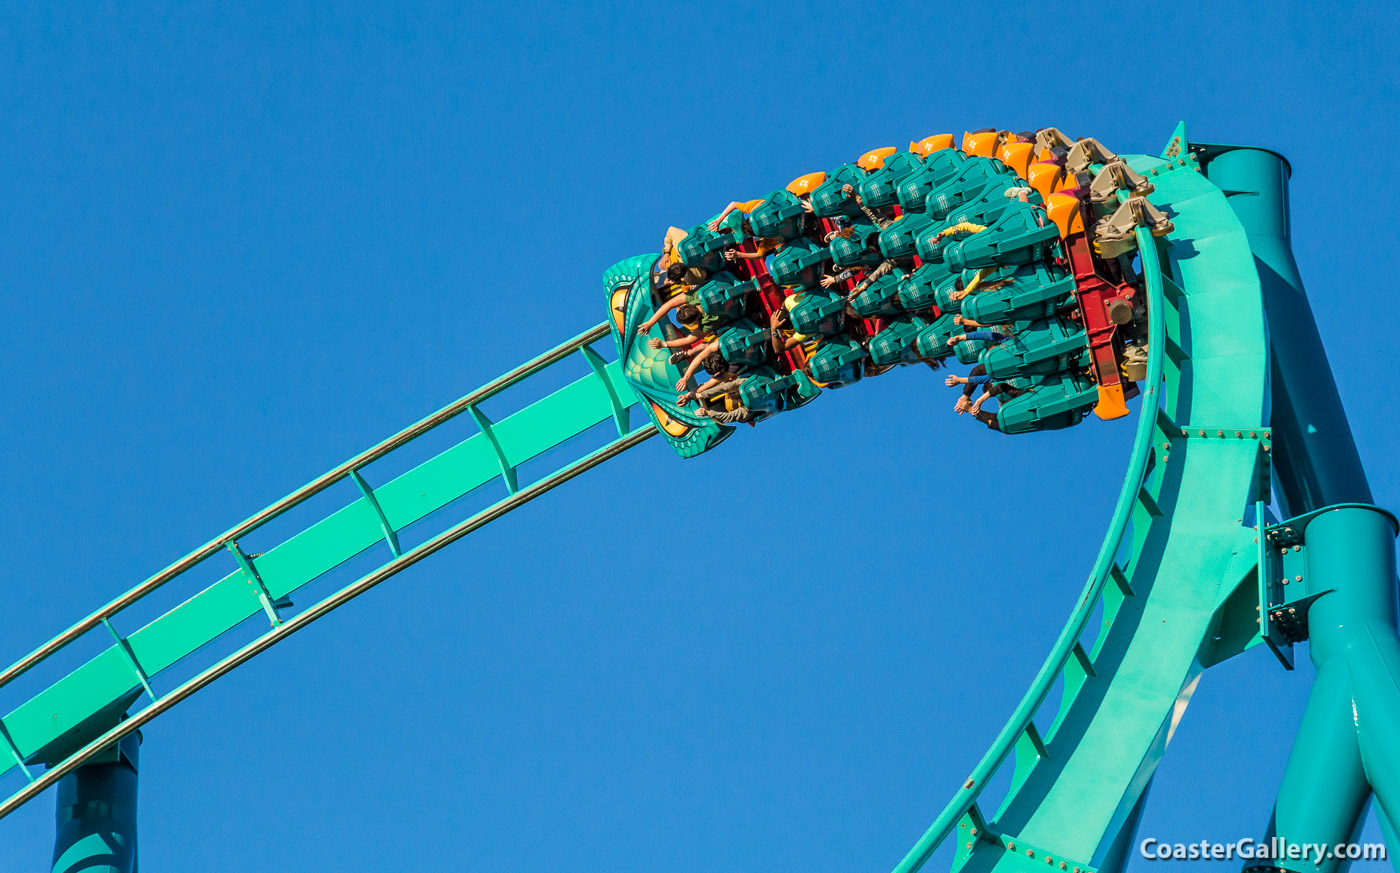 What is the longest roller coaster in Canada? Dragon Mountain and Leviathan are Canada's Longest Coasters.